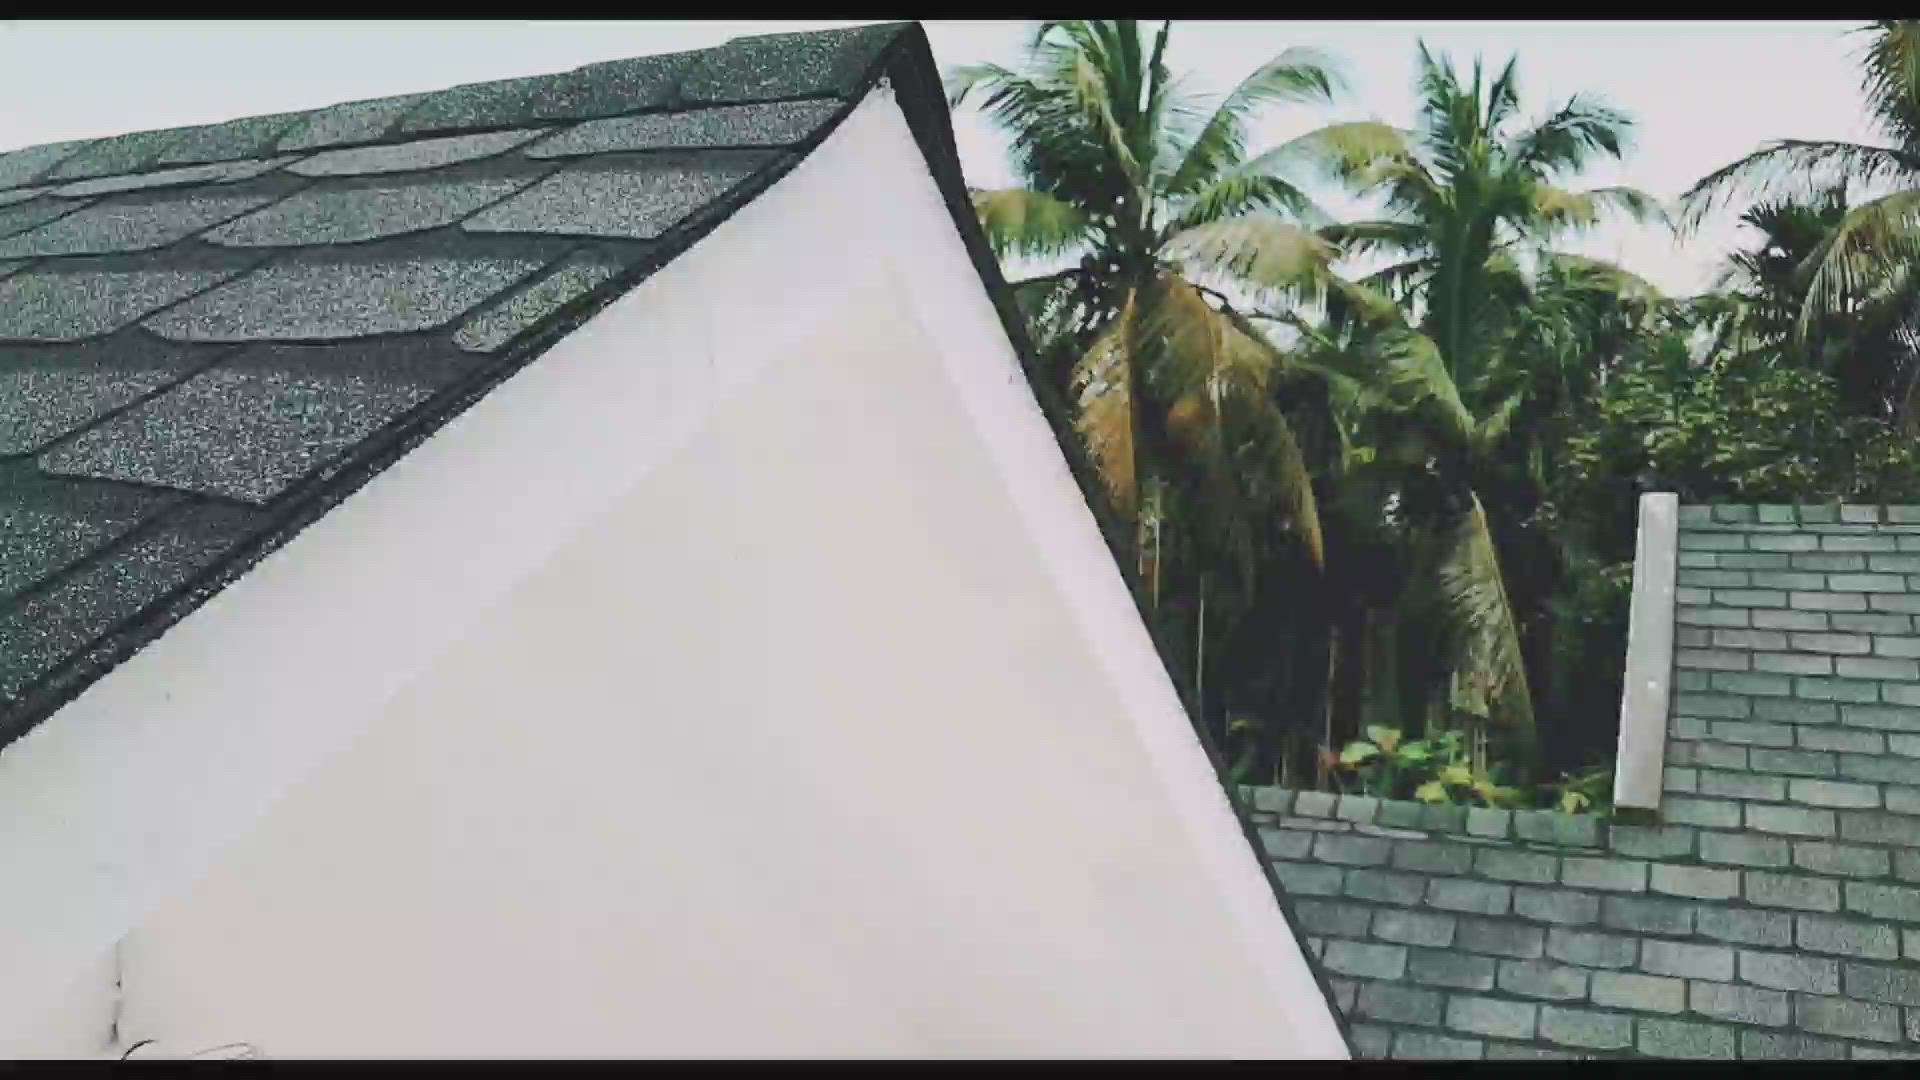 Roof Designs by Contractor Arif  mohd , Thrissur | Kolo